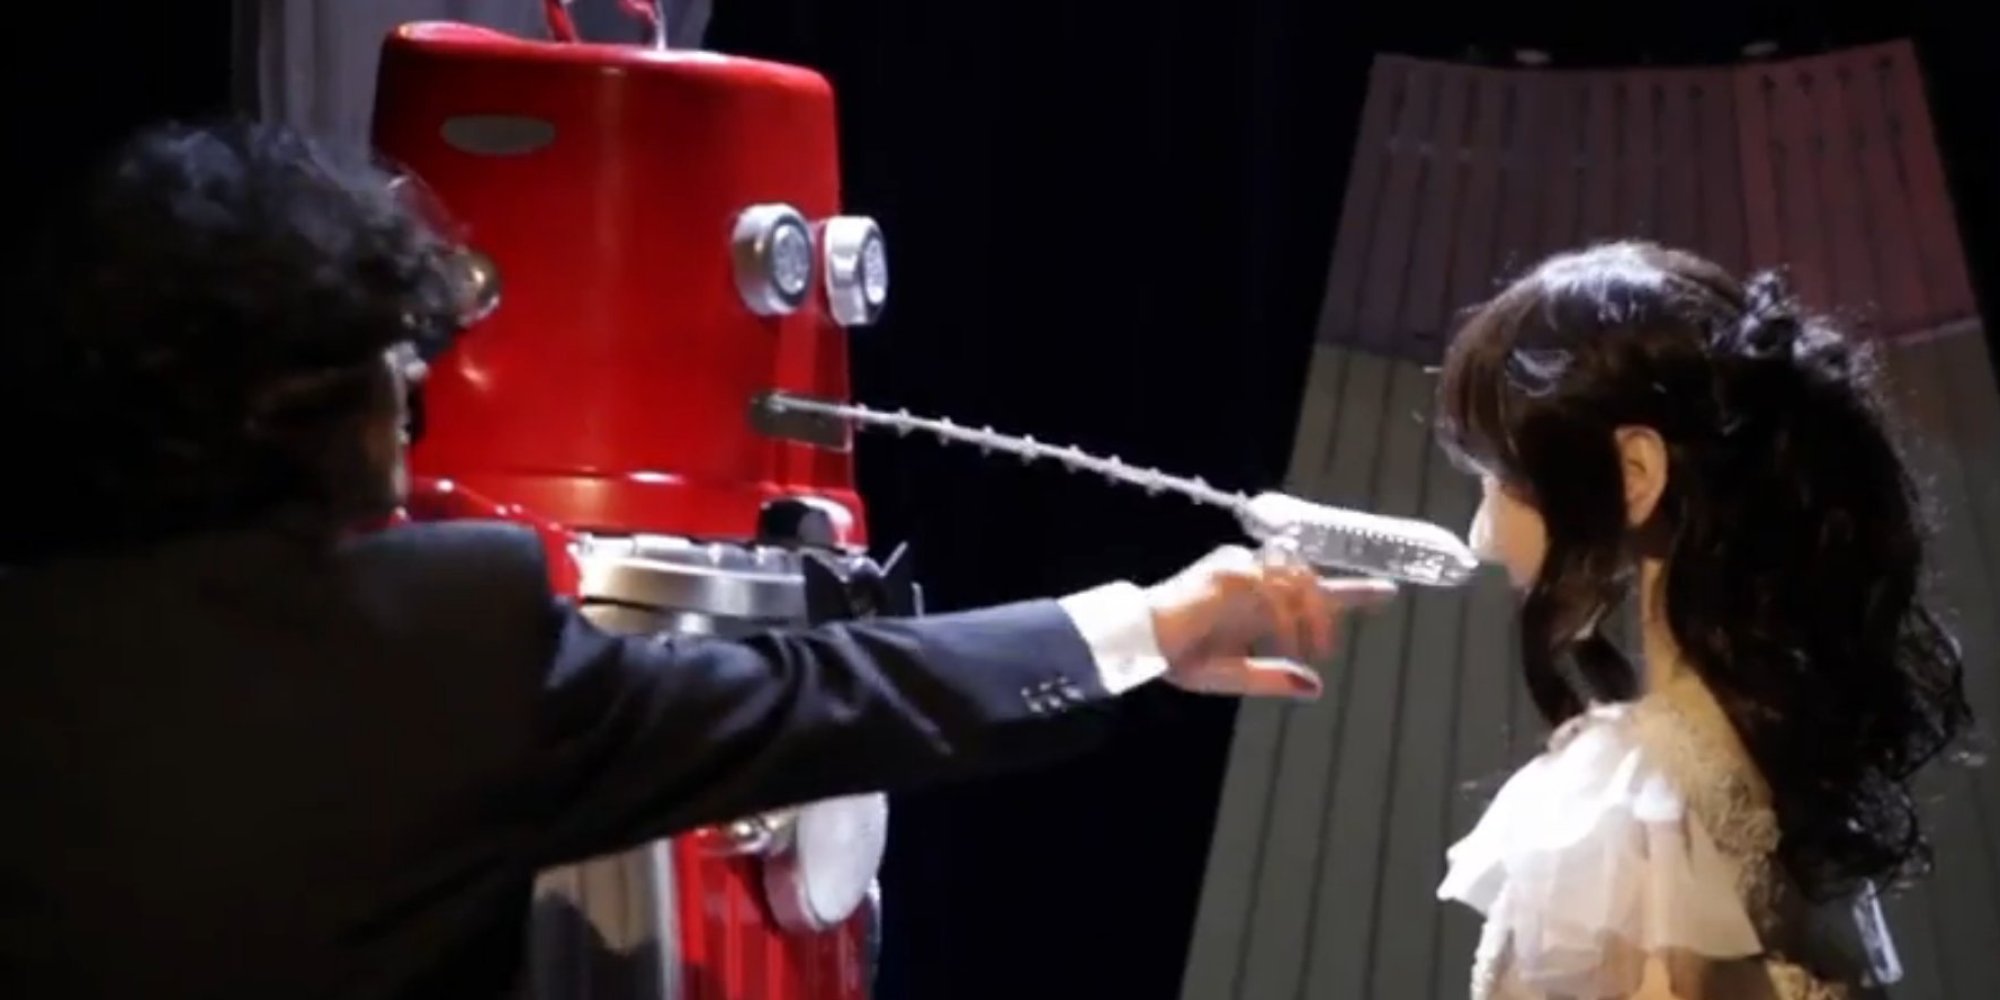 Robot Wedding In Japan Sees Bot Named Frois Marry A Humanoid Bride 